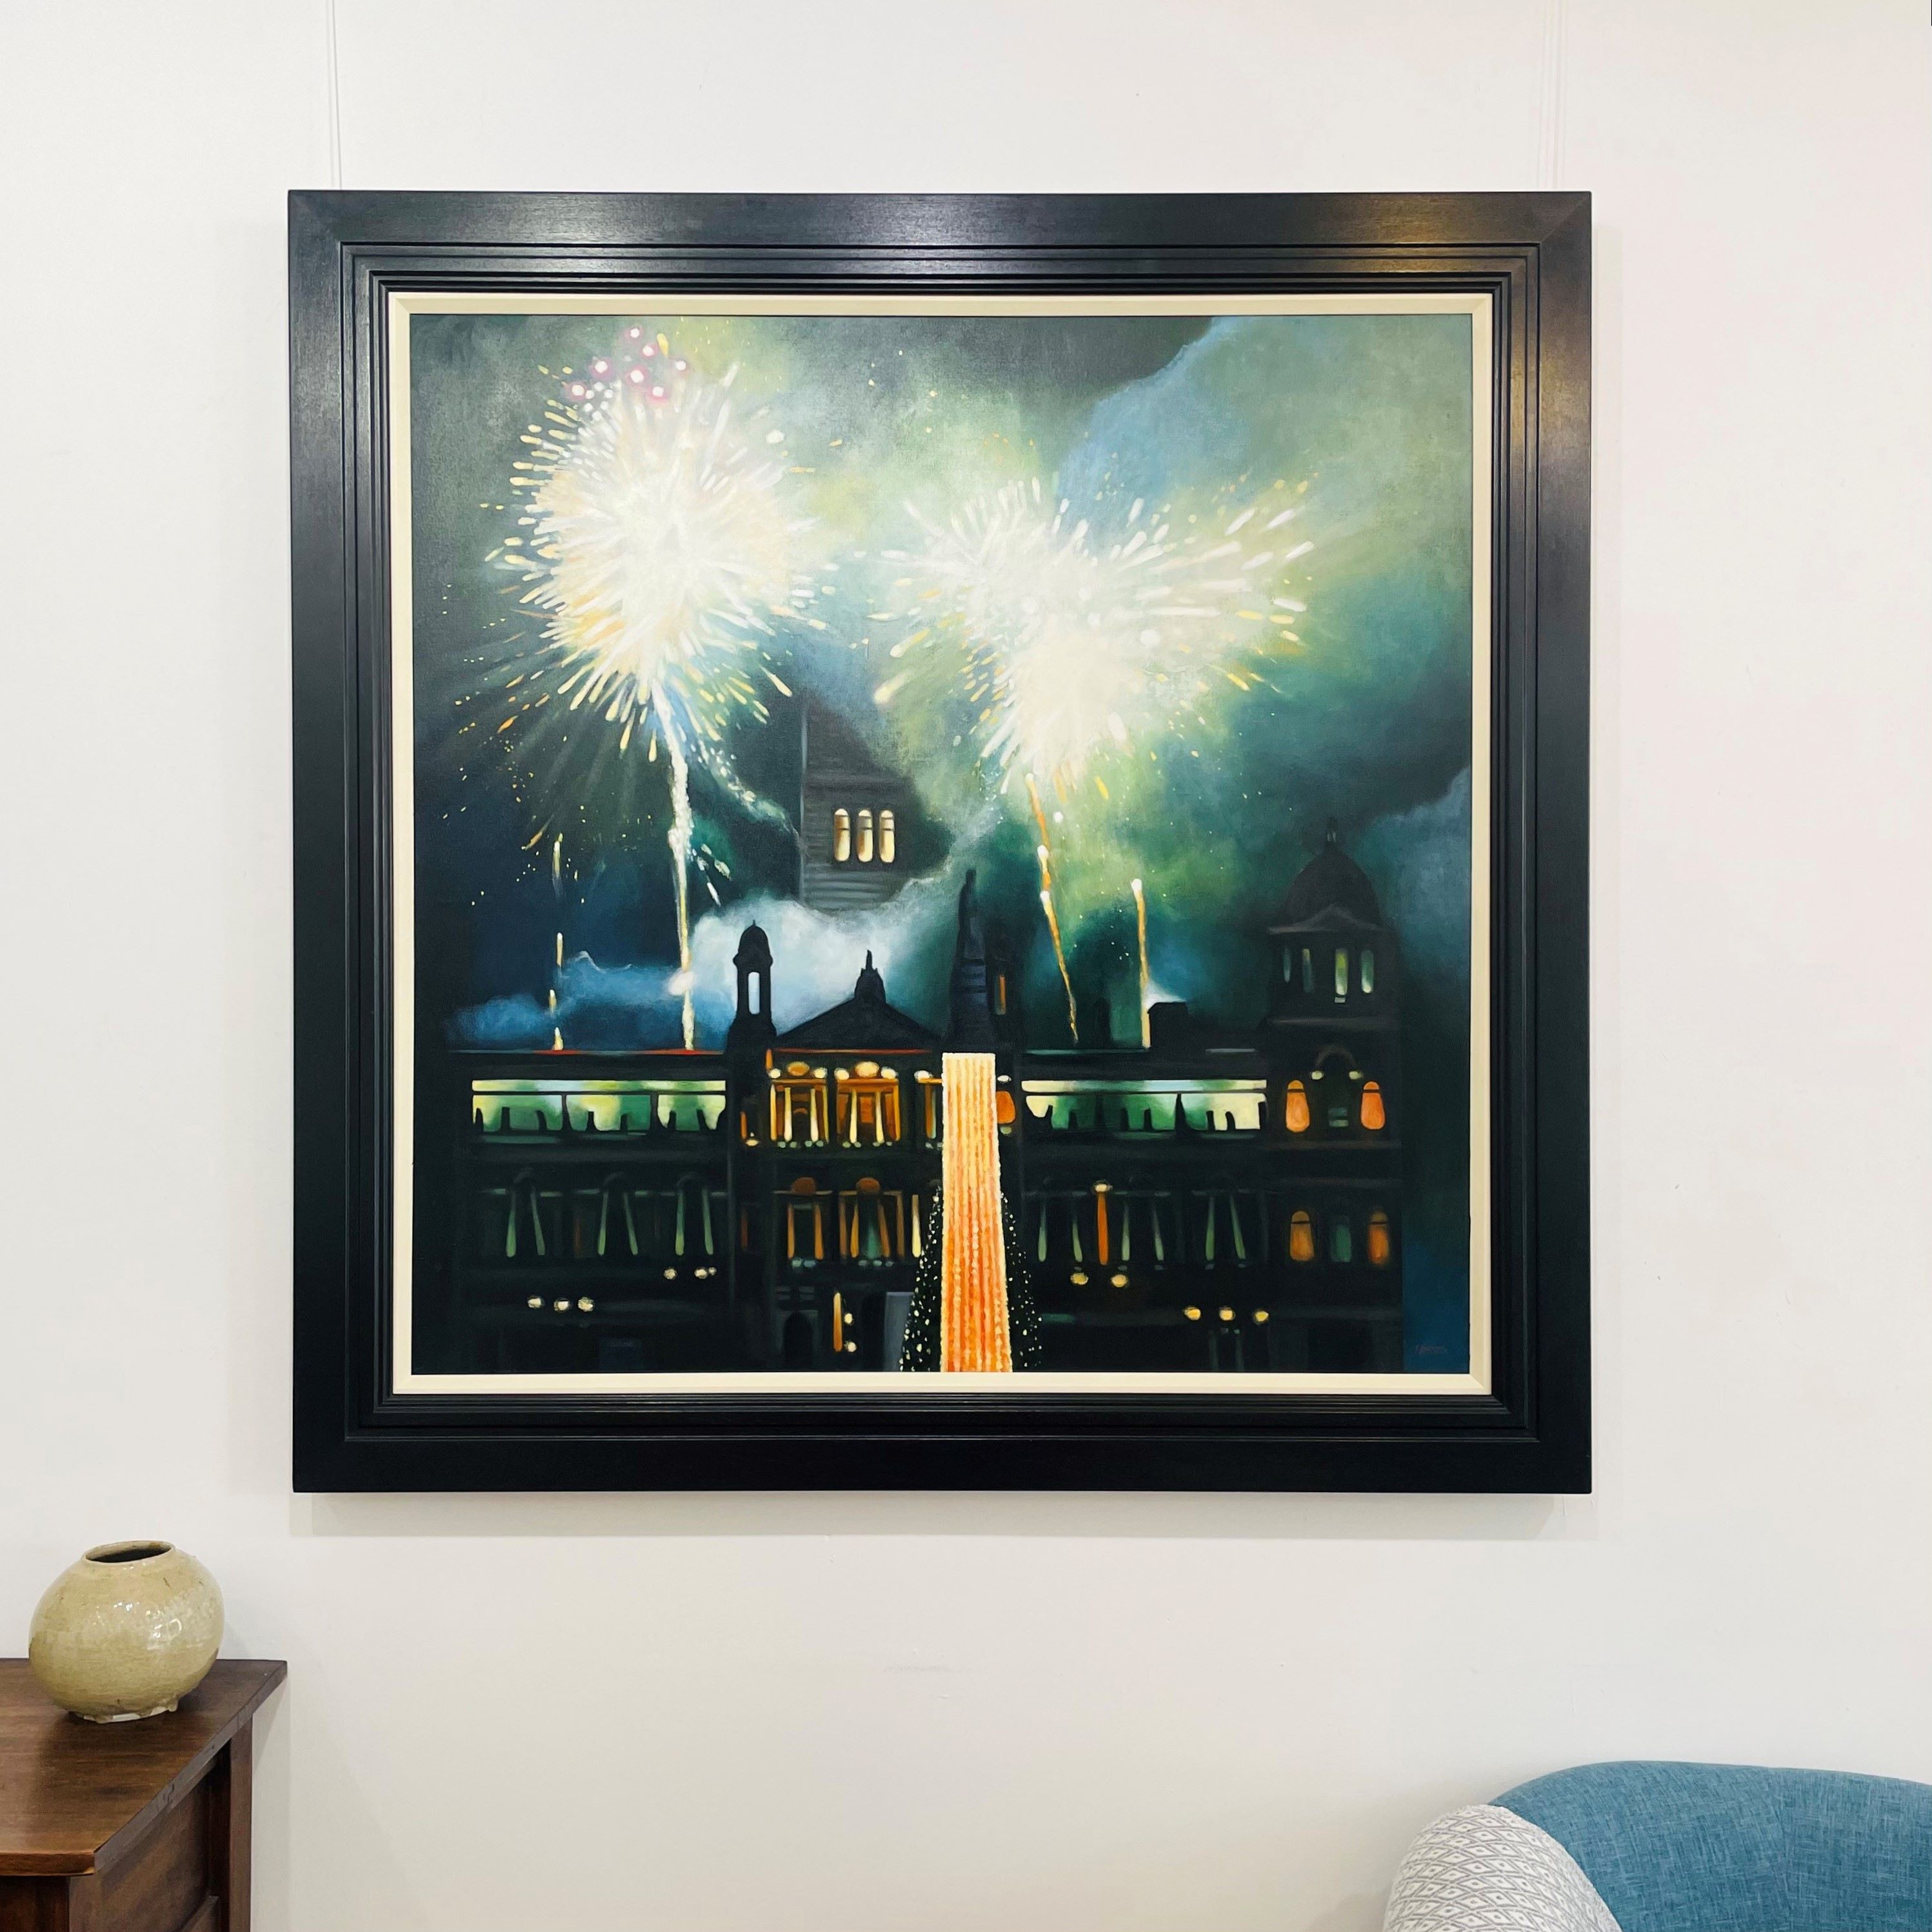 'Fireworks, Green and Gold' by artist Lesley Banks